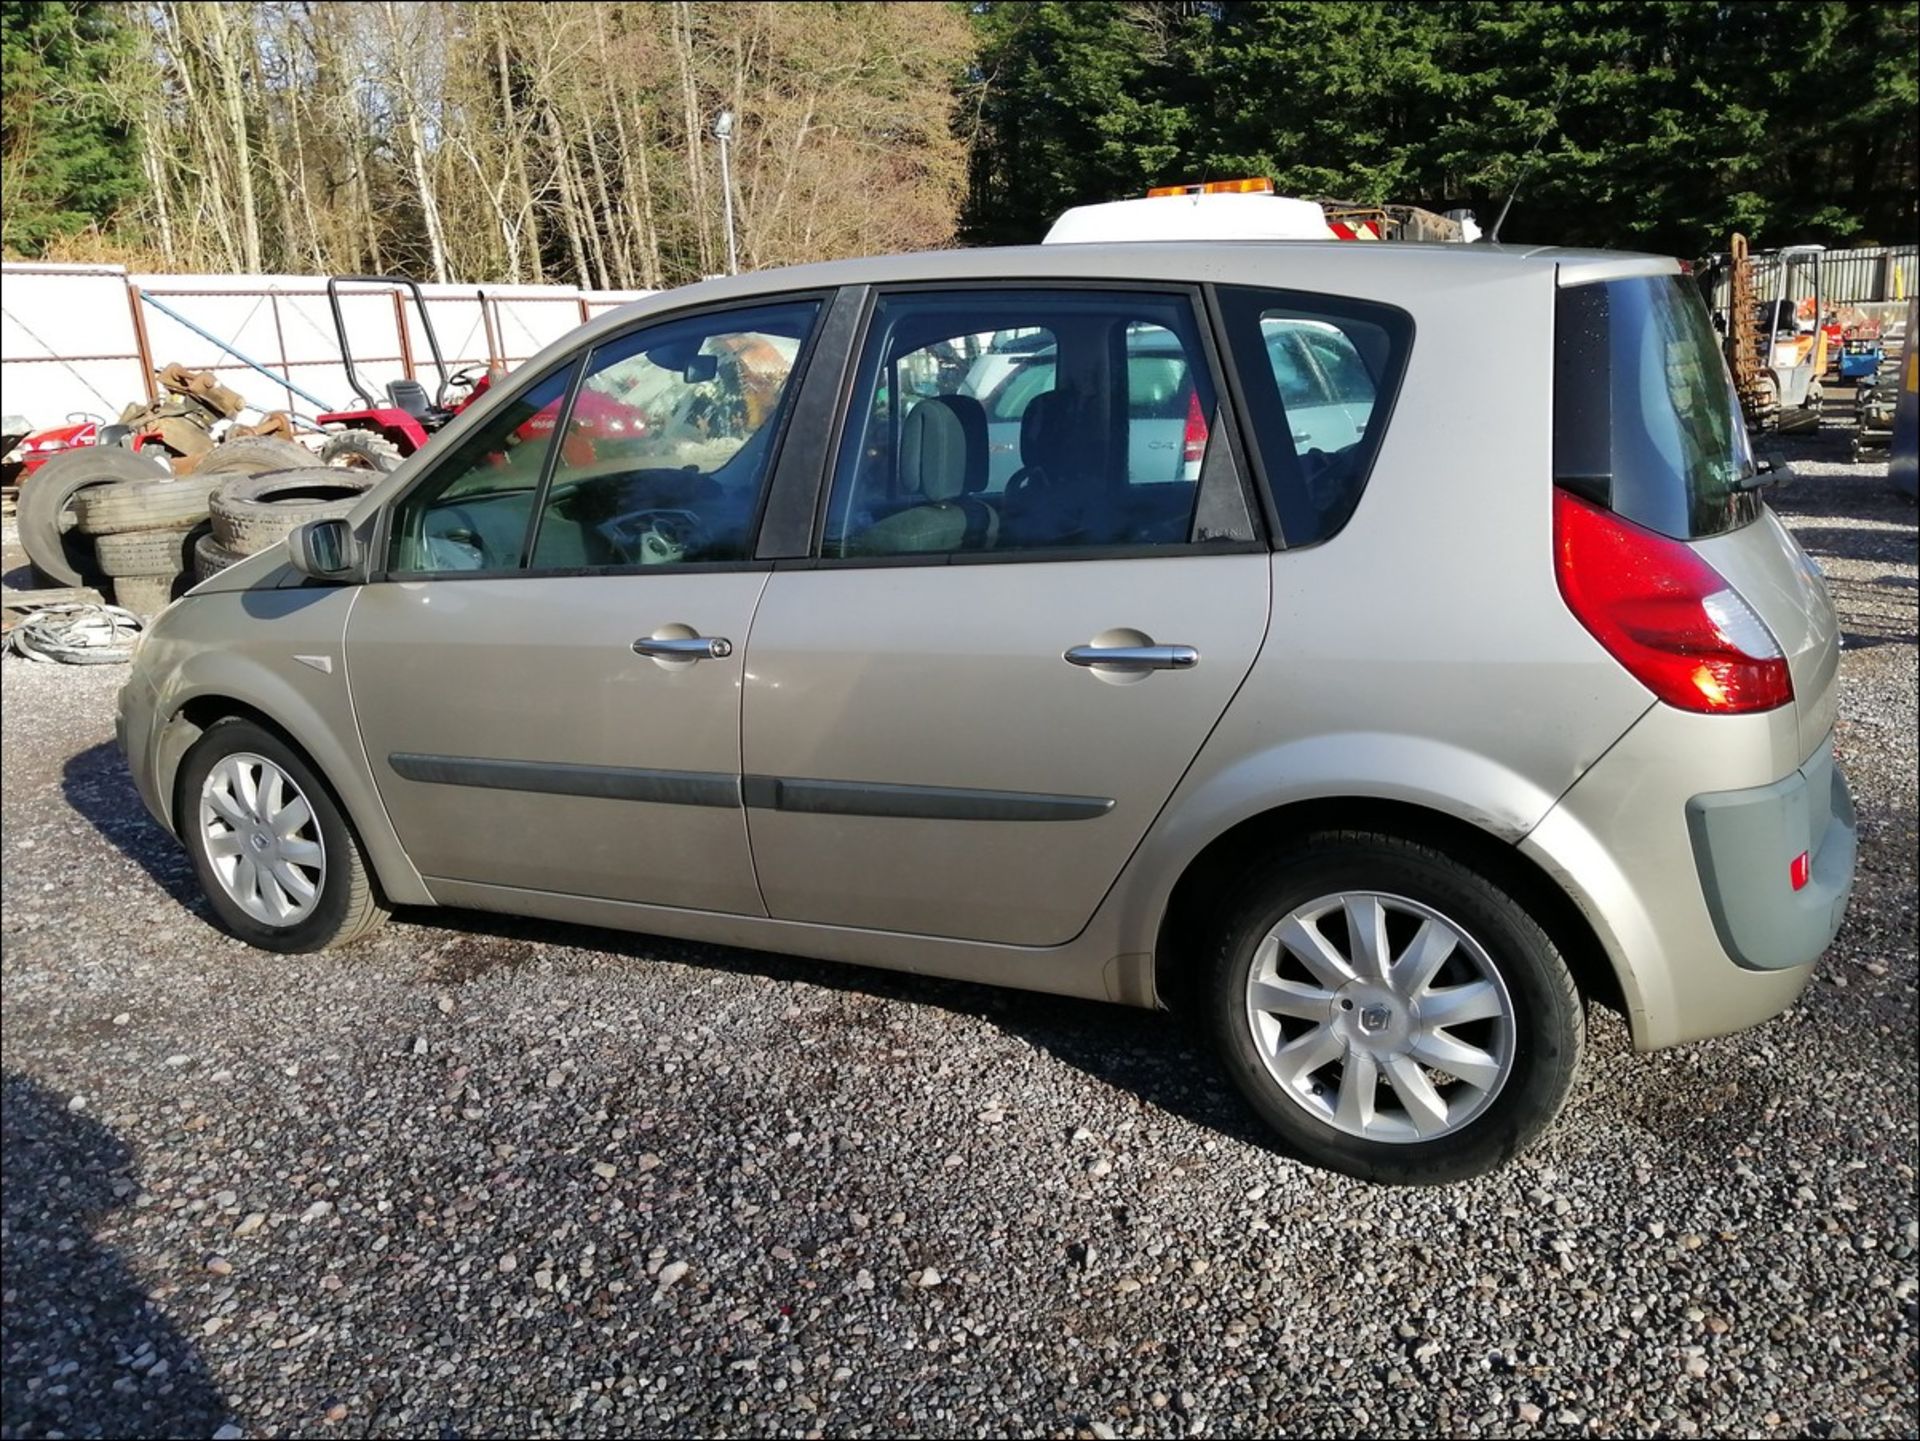 07/07 RENAULT SCENIC DYN VVT - 1598cc 5dr MPV (Gold) - Image 6 of 11